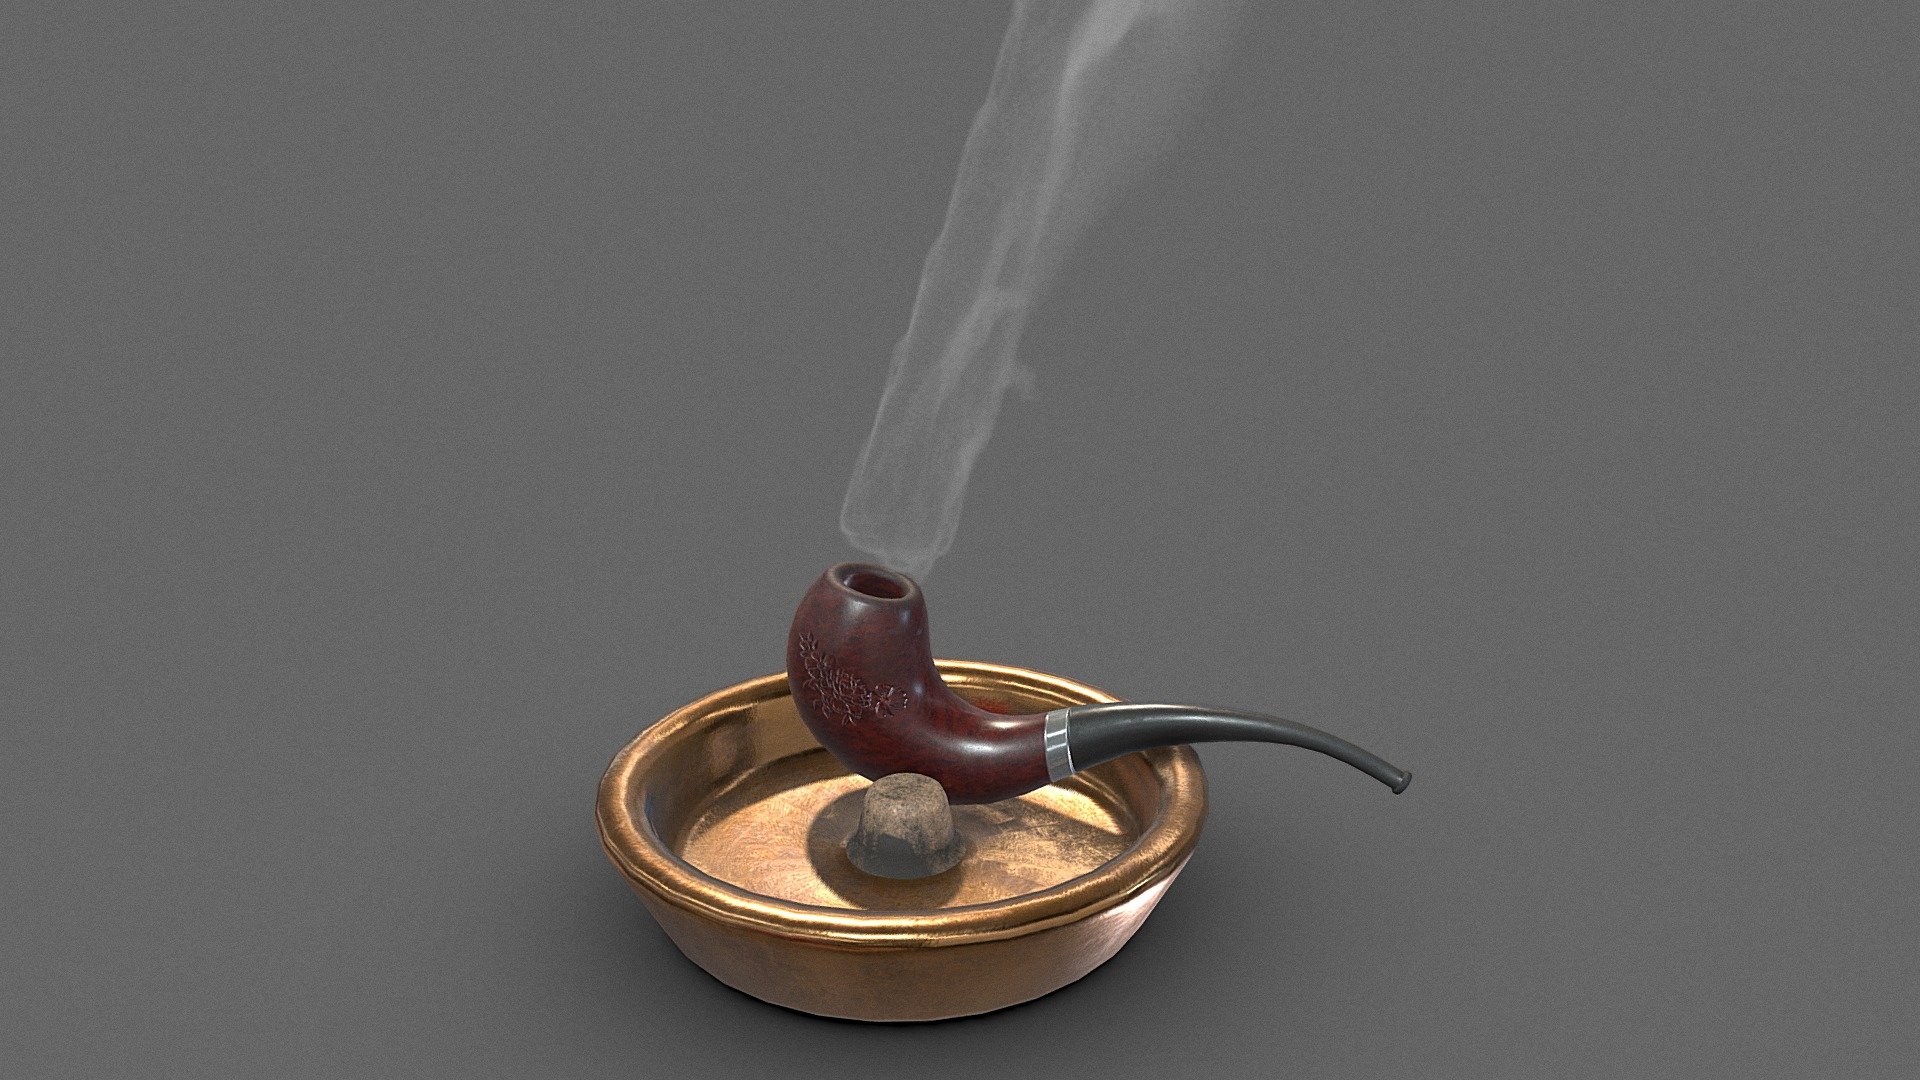 Smoking pipe and ashtray with a knocker in the middle.  Handy prop for any sort of interior scene.

PBE textures @4k - Smoking pipe and ashtray - Buy Royalty Free 3D model by Sousinho 3d model